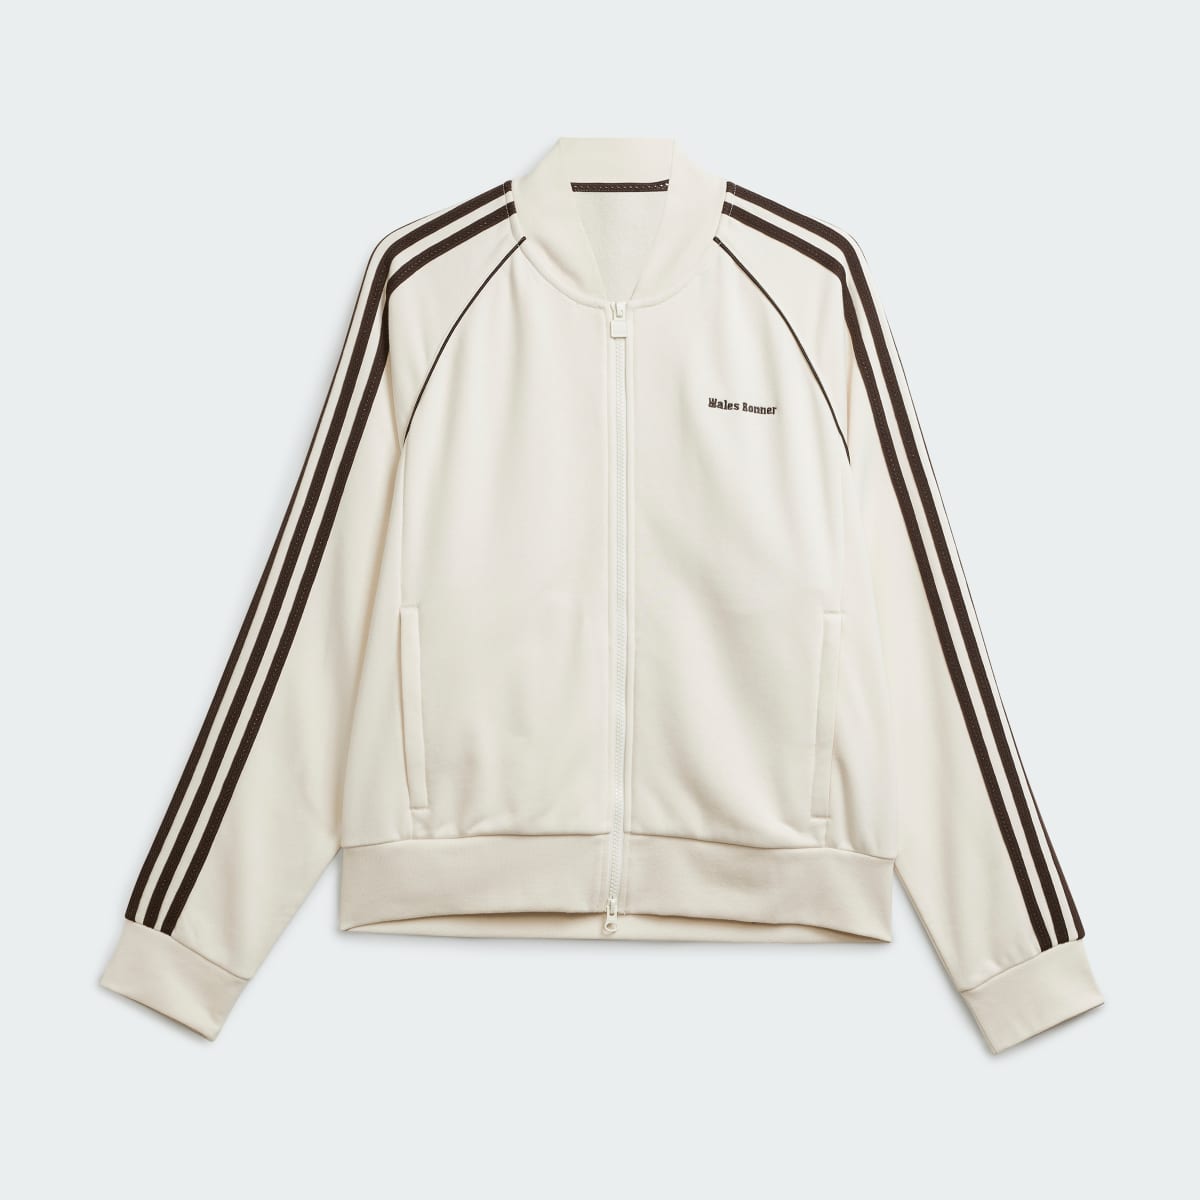 Adidas Track top Wales Bonner Statement. 4